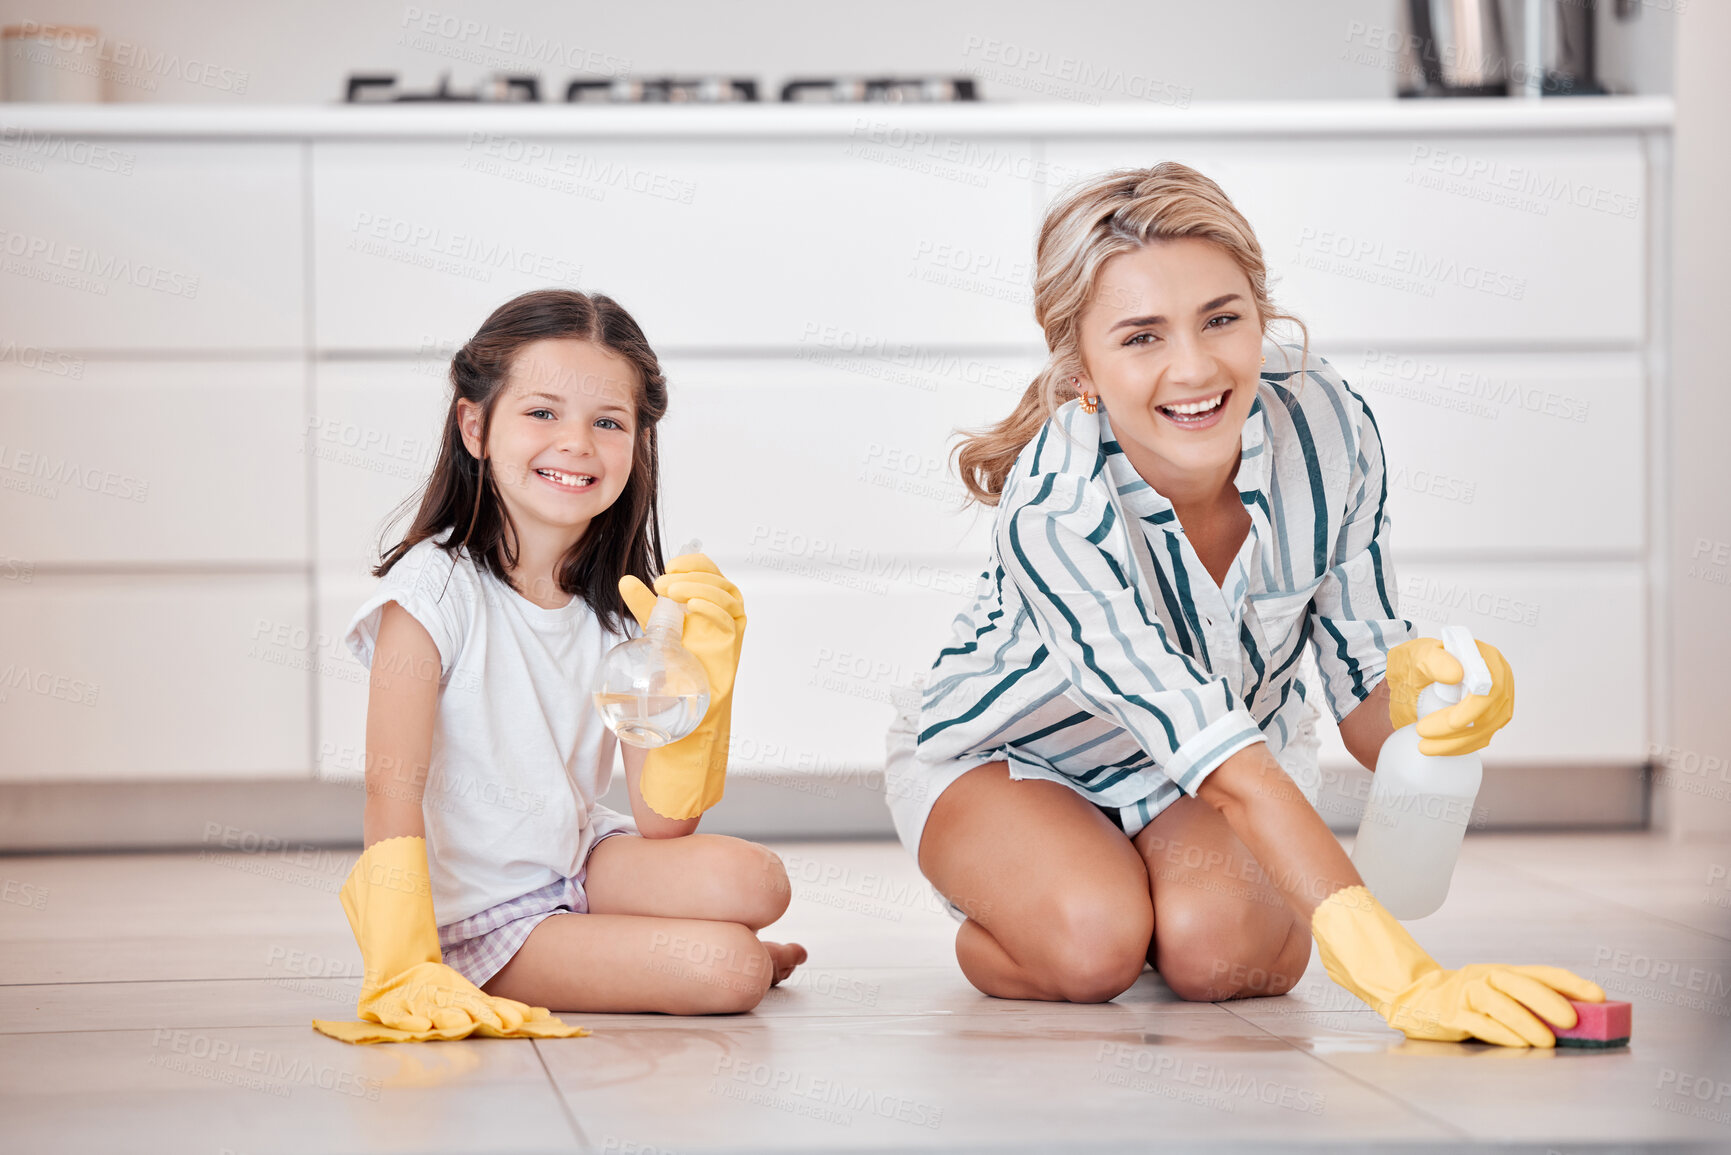 Buy stock photo Portrait of a smiling young caucasian woman kneeling and scrubbing the floor with her daughter. Adorable little girl helping her mother with housework and chores. Teaching children healthy habits